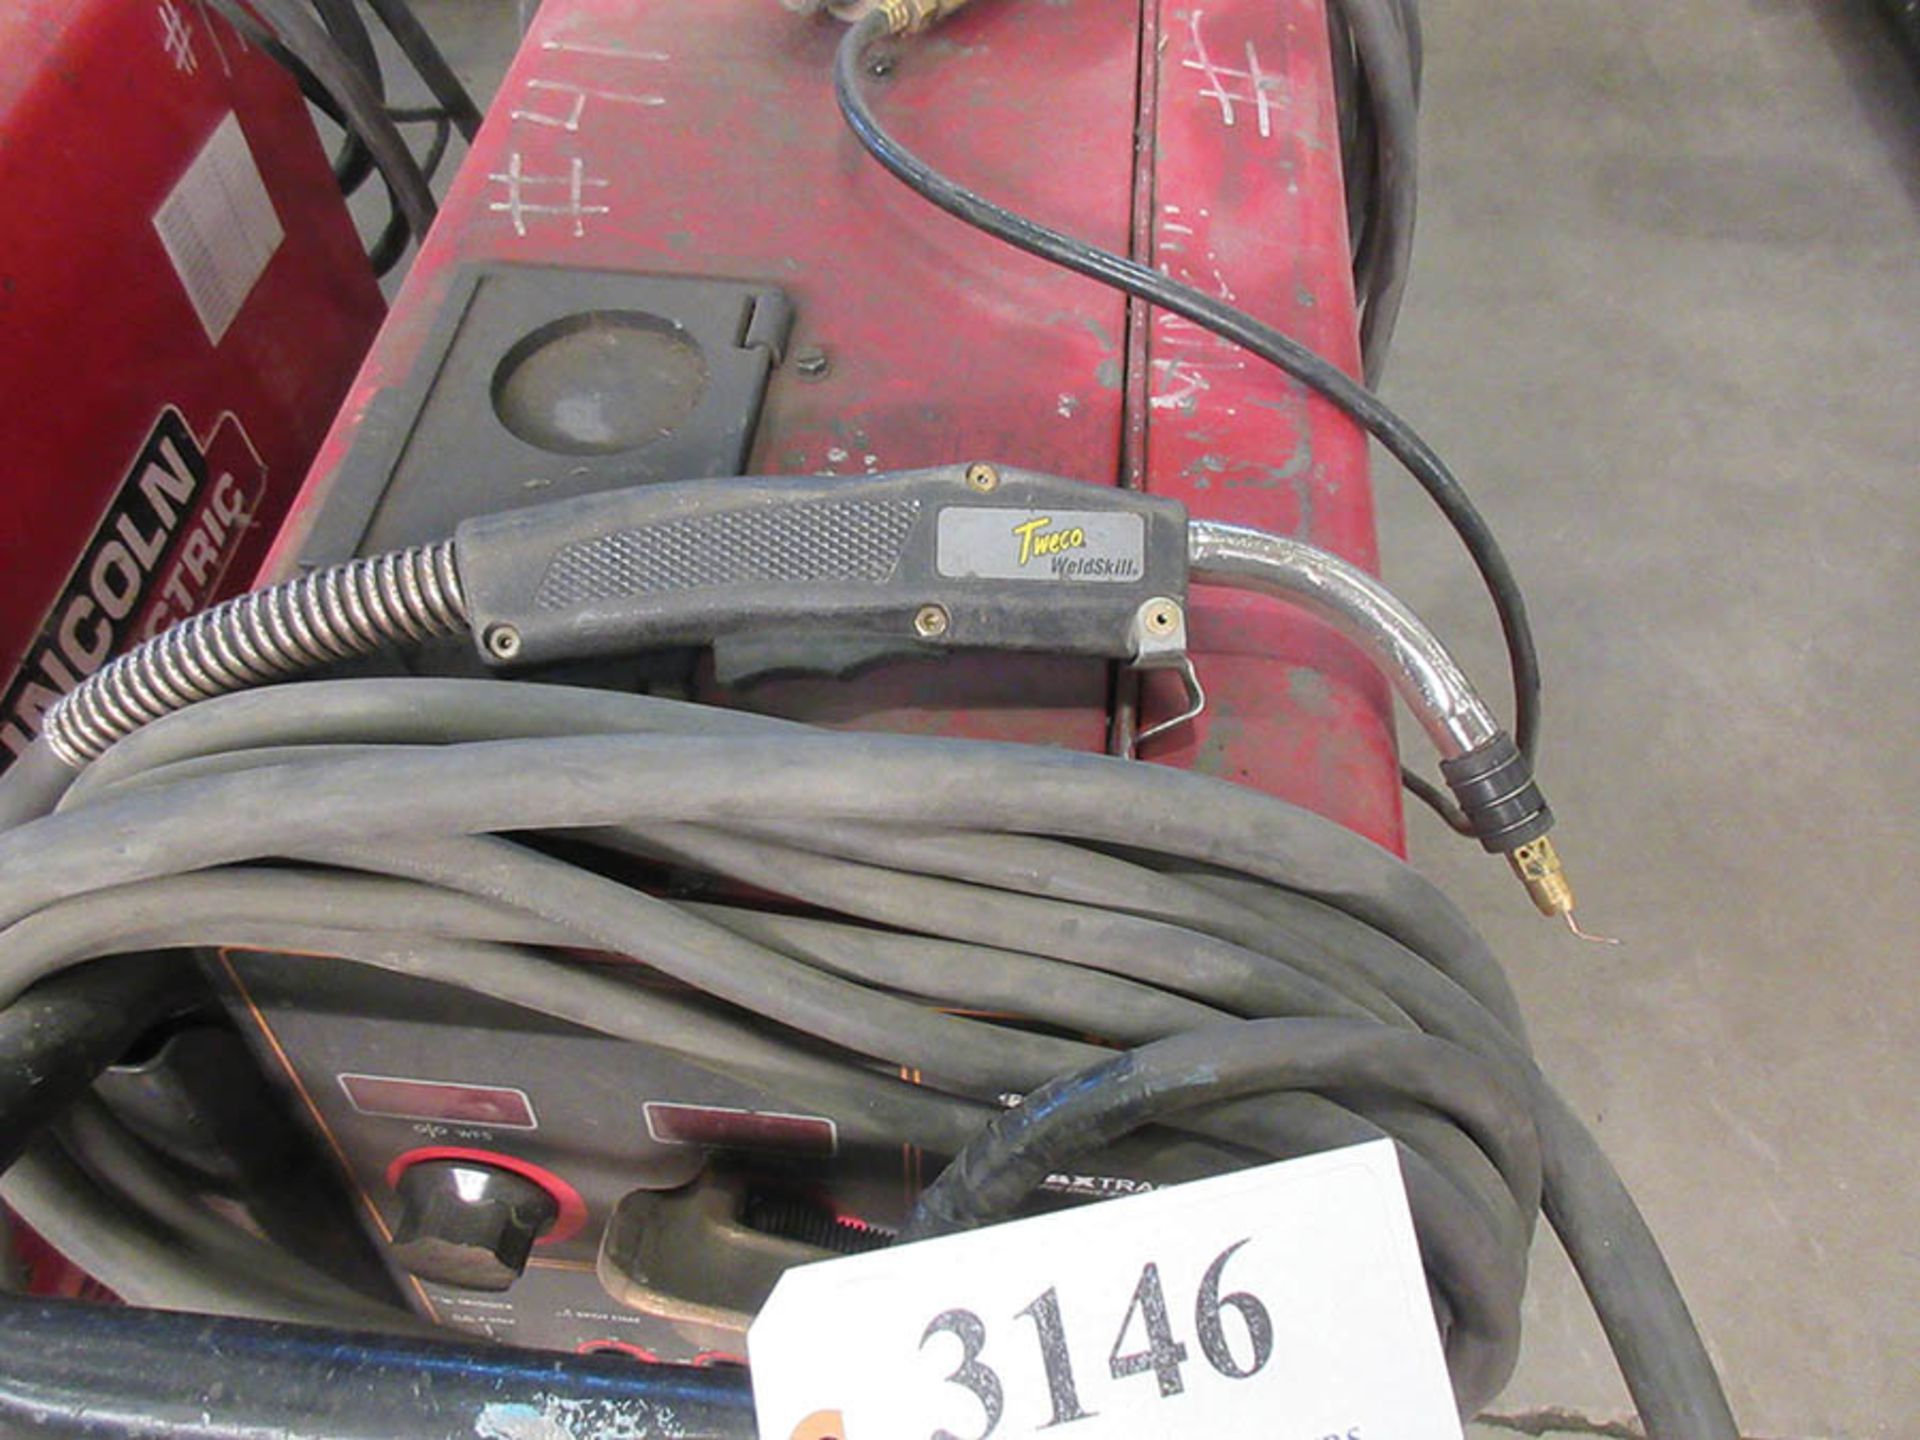 LINCOLN ELECTRIC 256 POWER MIG WELDER WITH TWECO WELDSKILL MIG GUN, #41 - Image 3 of 3